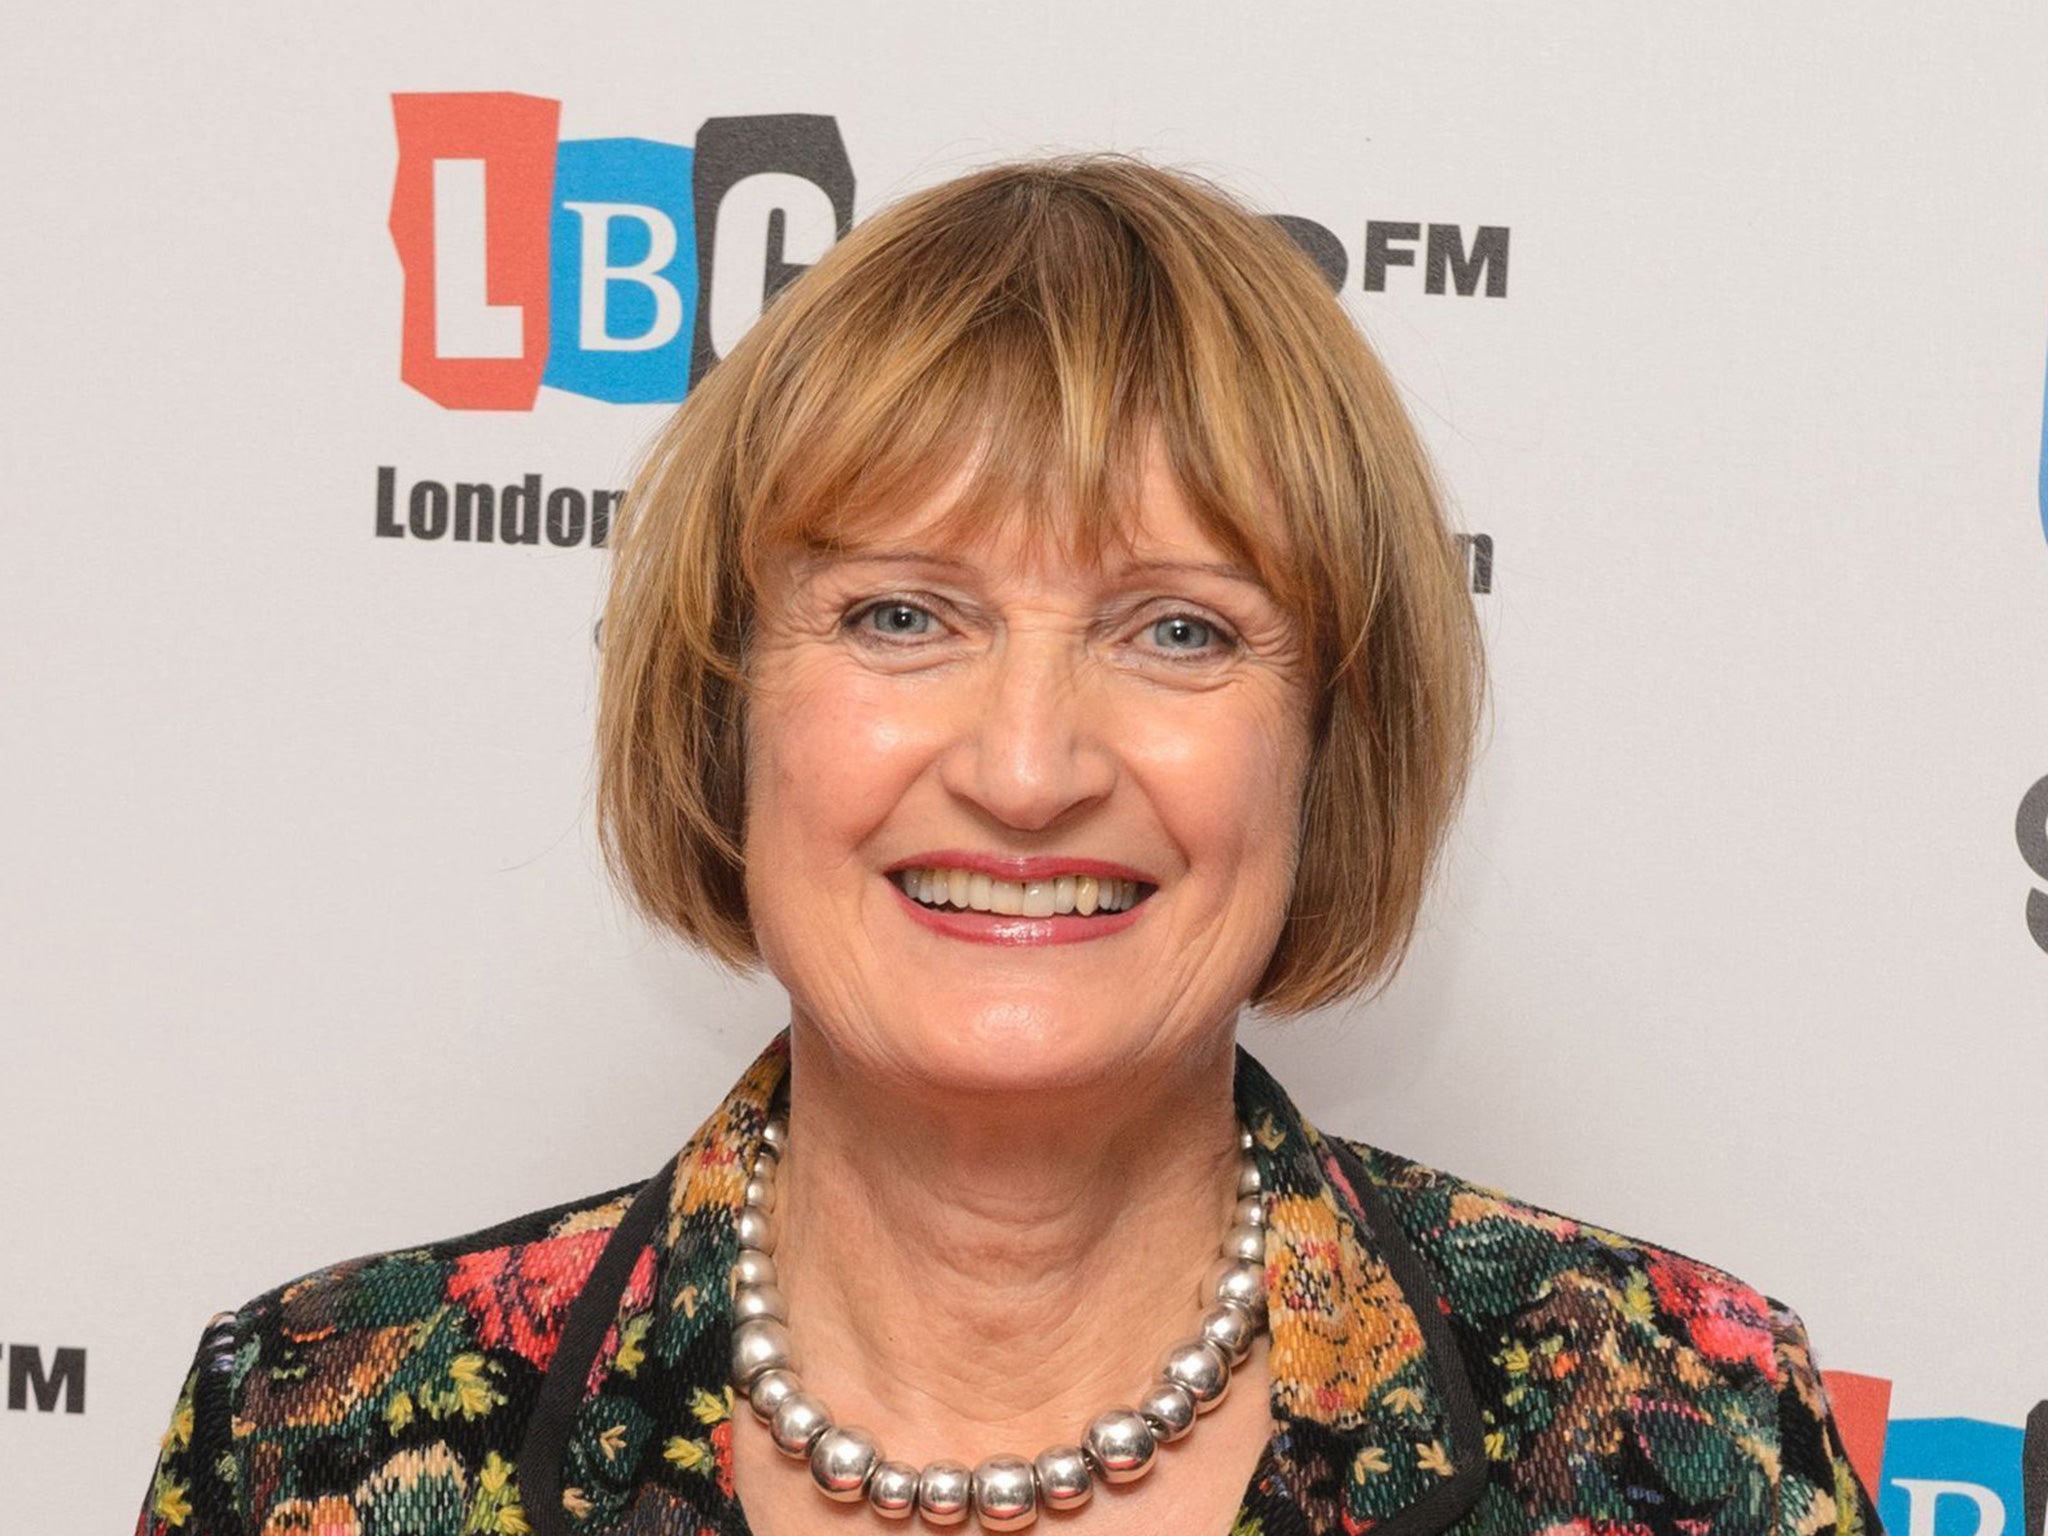 Tessa Jowell is the current frontrunner to become the Labour Party's London Mayoral candidate